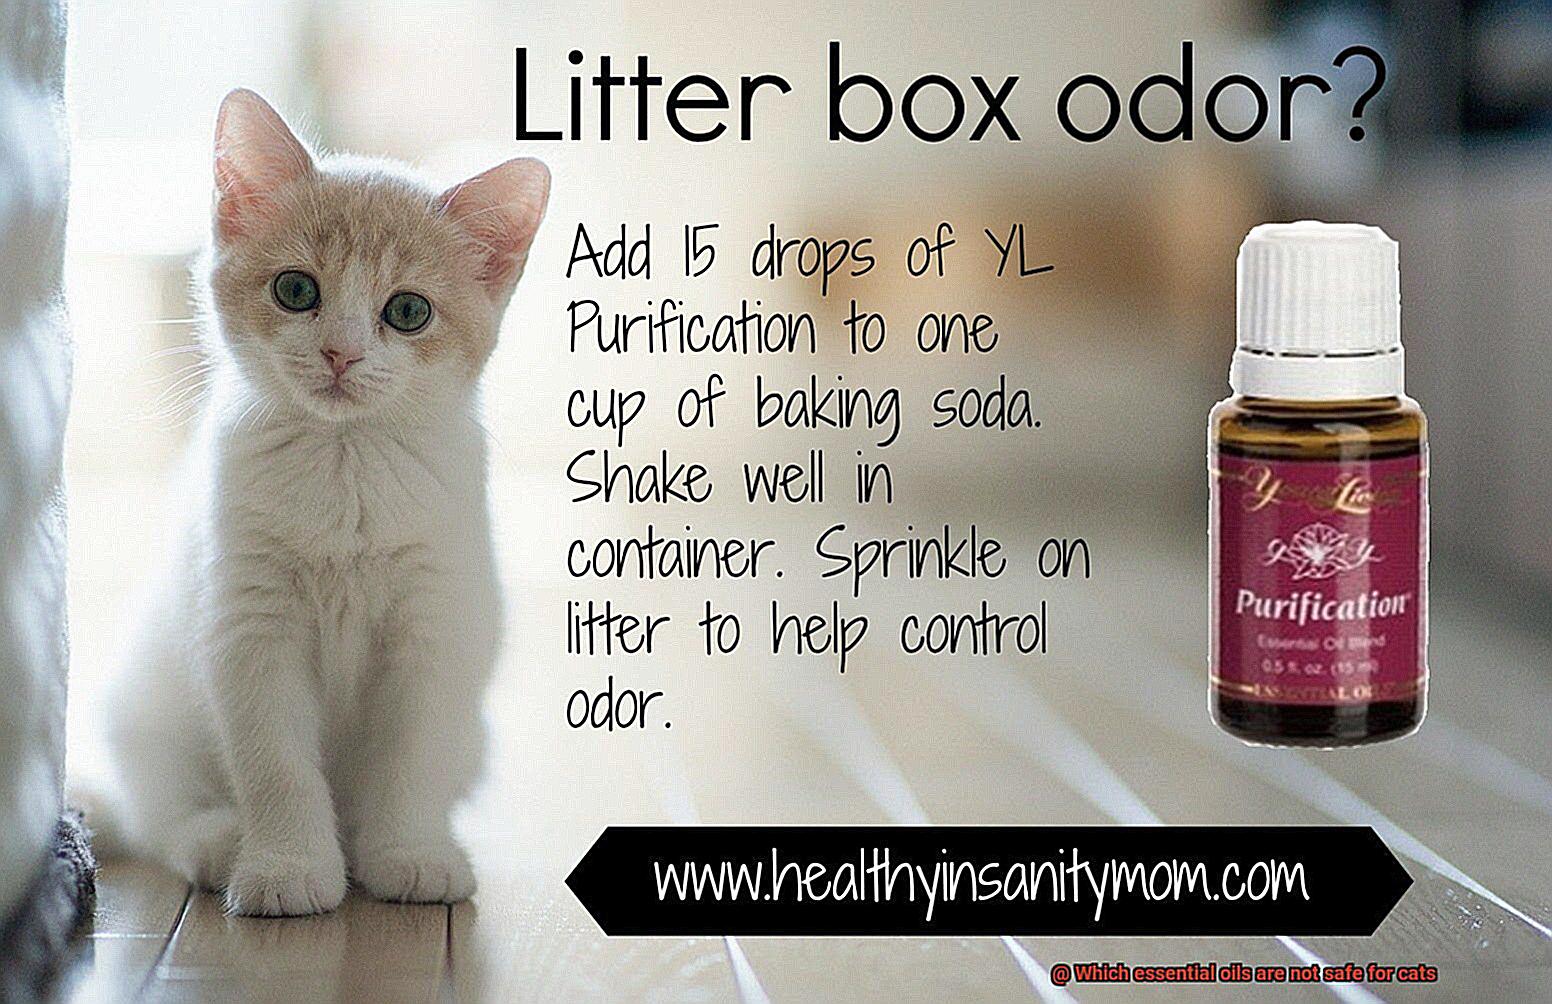 Which essential oils are not safe for cats-4